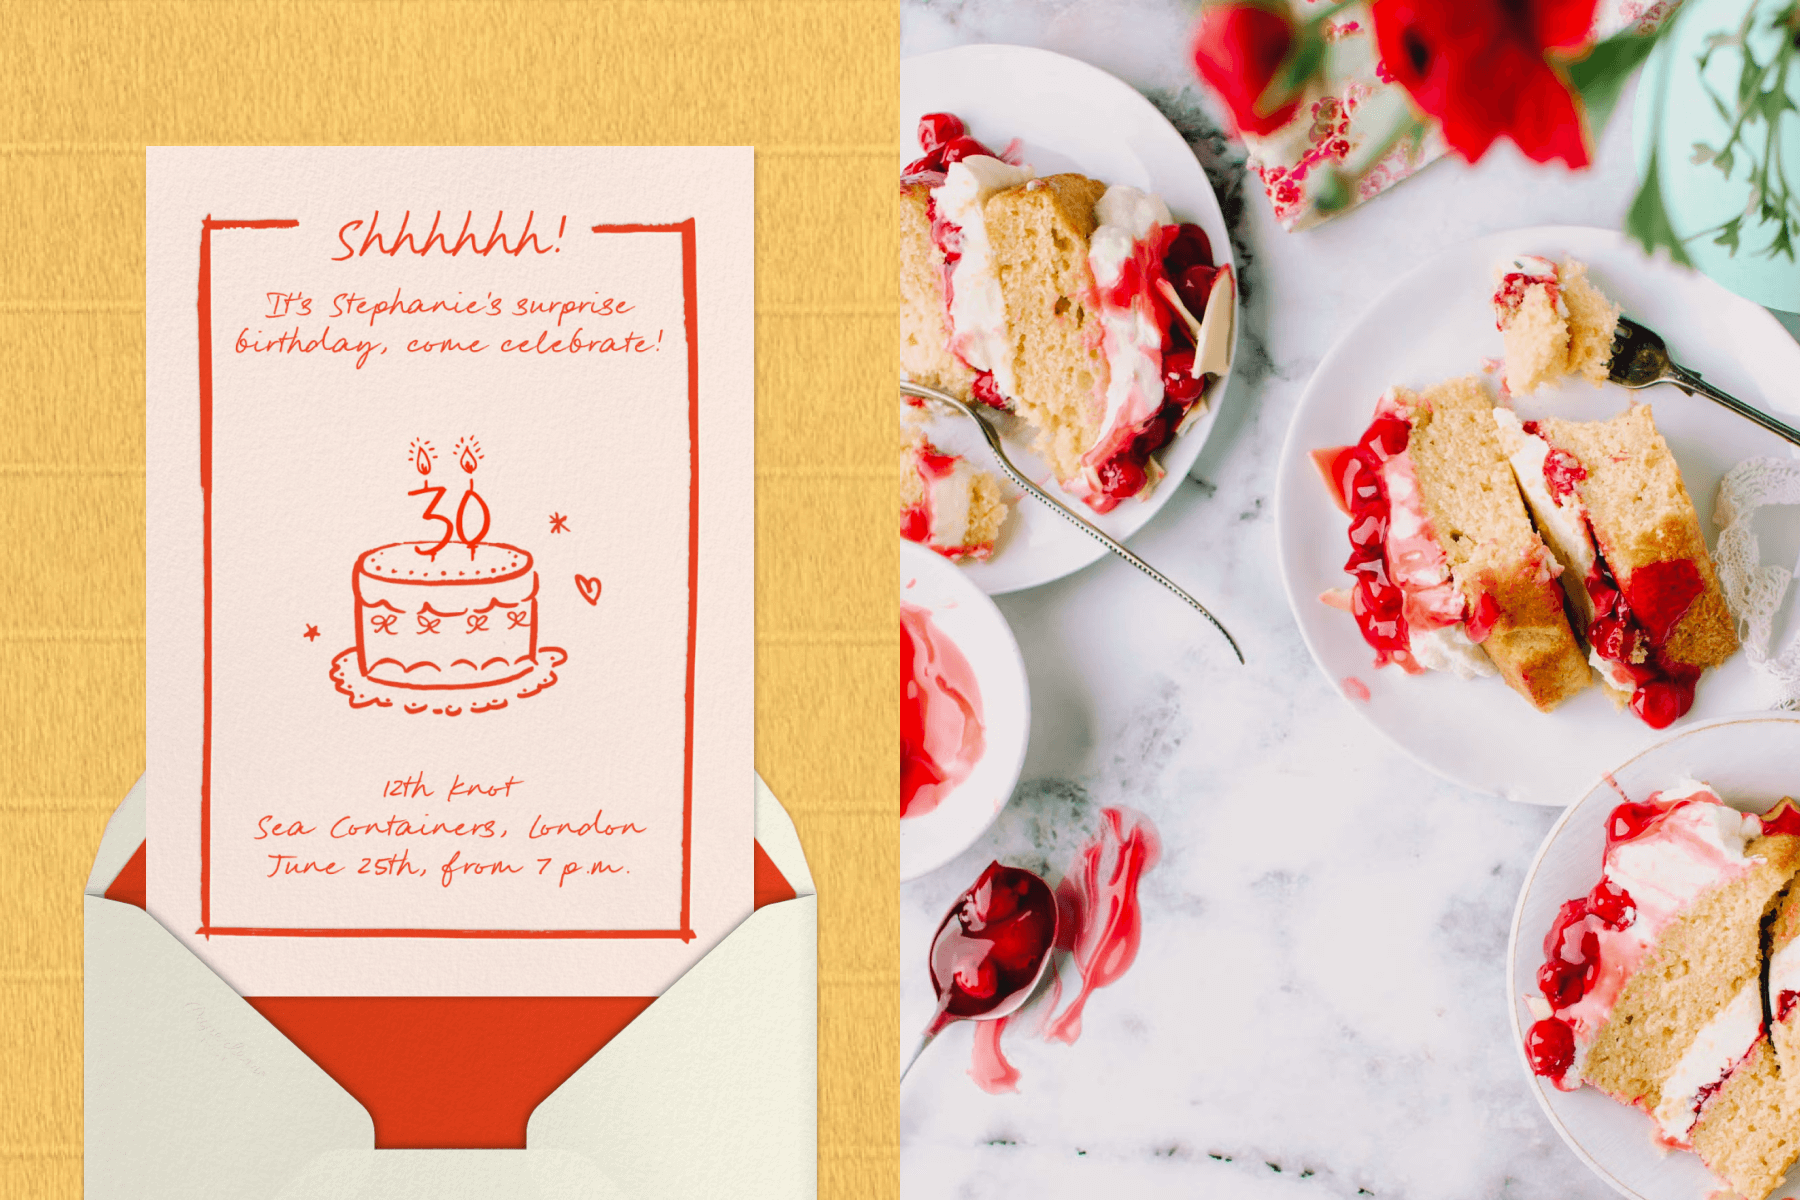 A light pink invitation with a red doodle illustration of a cake with ‘30’ candles on top and a red border; slices of cherry layer cake on dessert plates with forks.